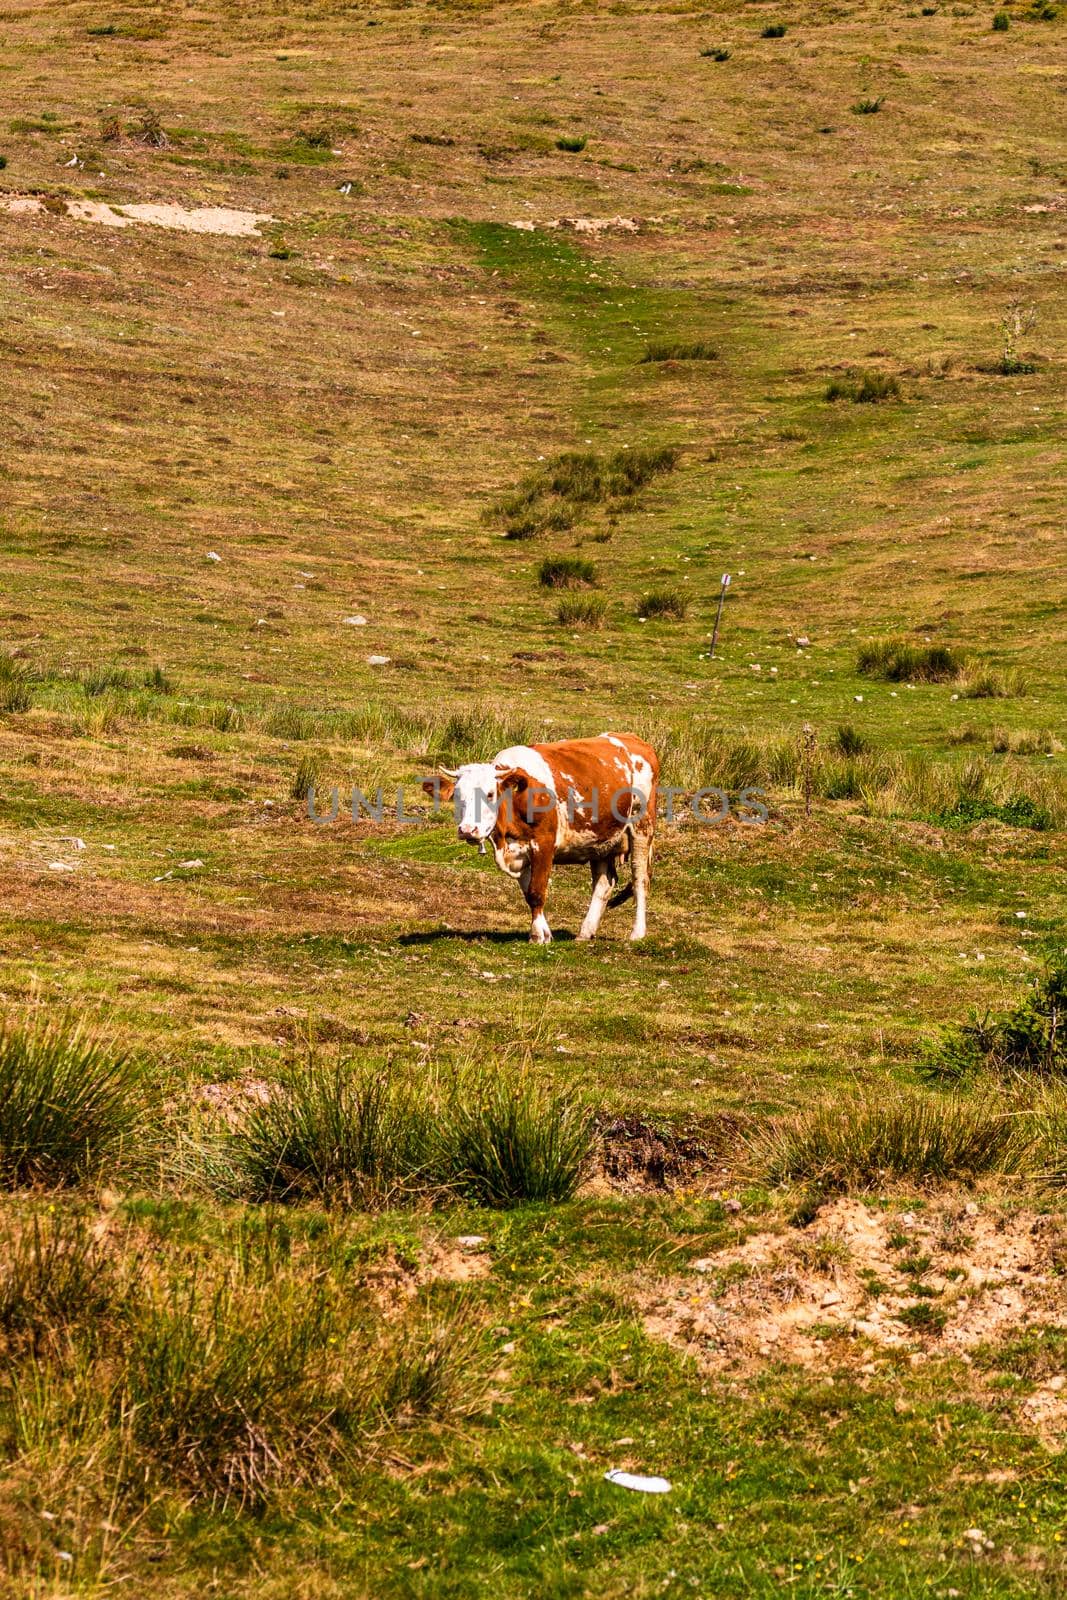 Cow standing and grazing on grassy field, sunny day by vladispas